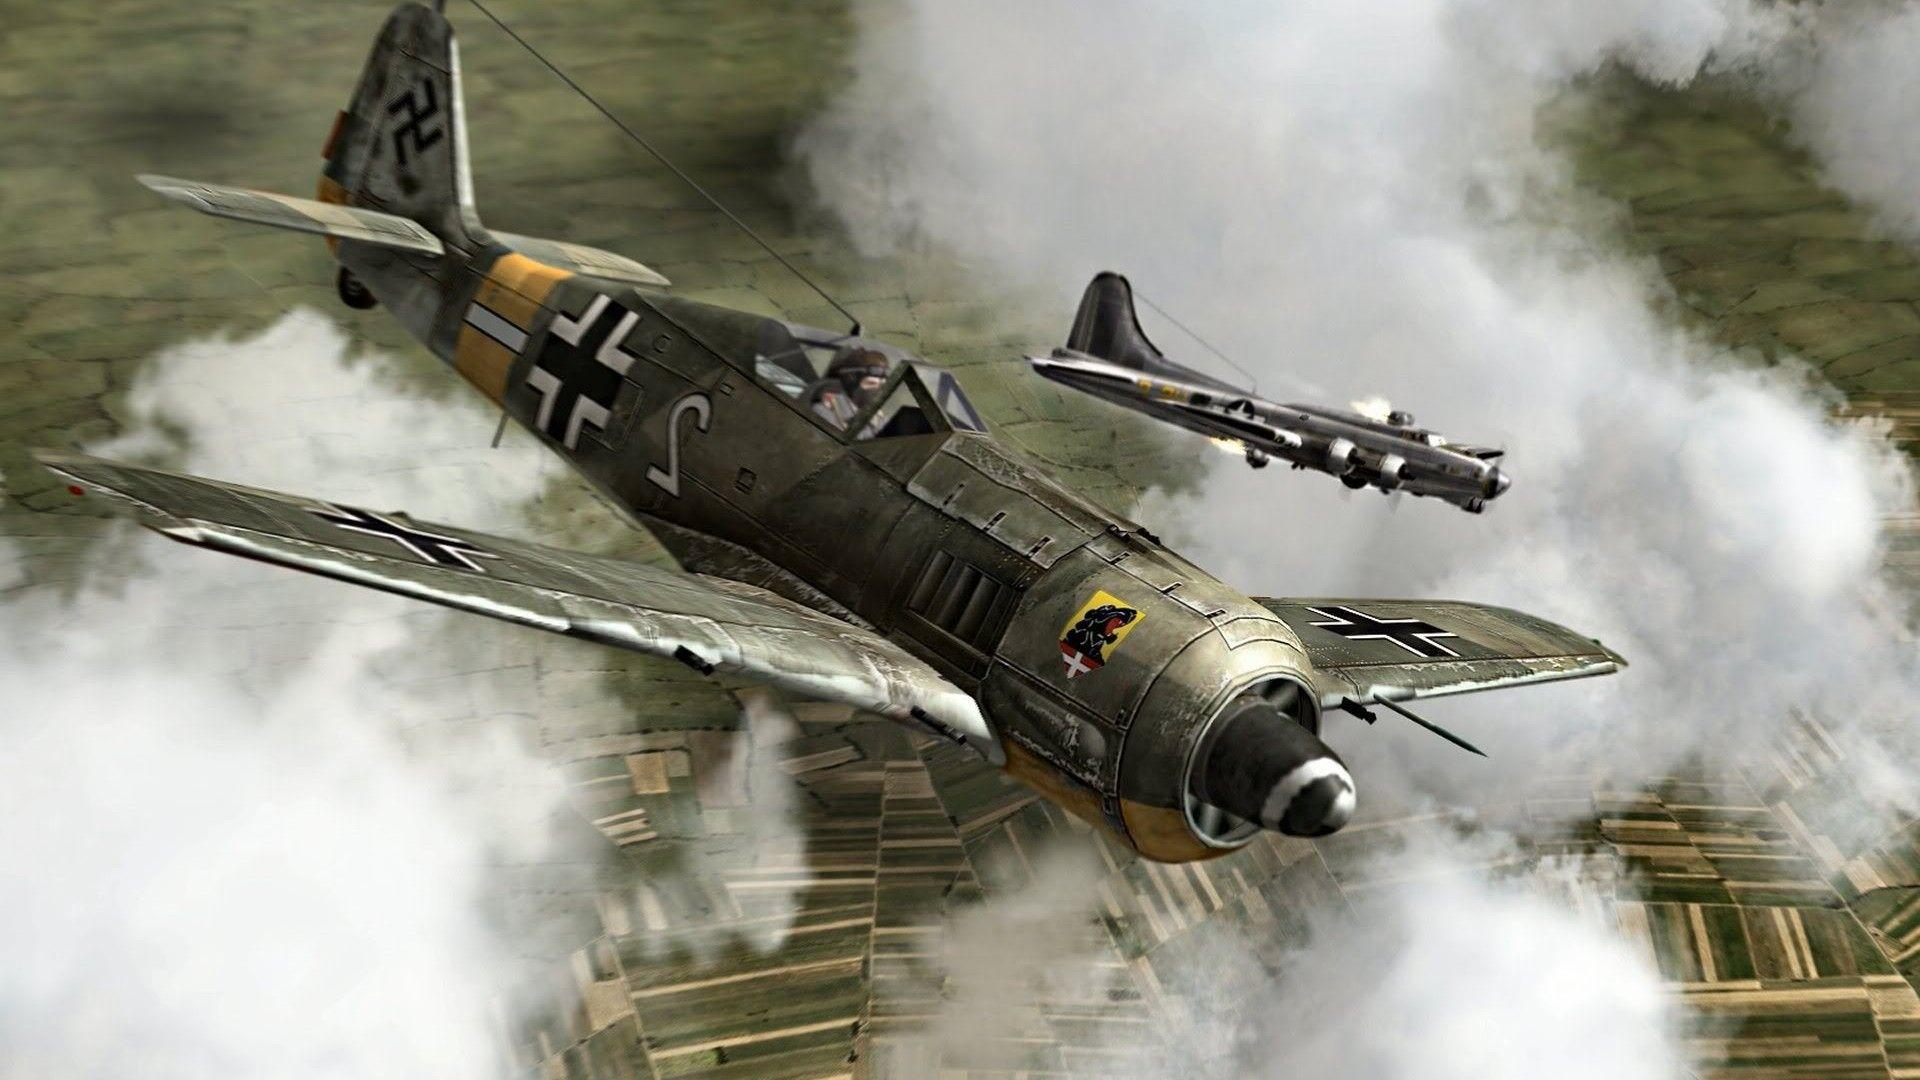 Fw 190 A5 Wwii Plane Art Military Aircraft Wallpaper Aircraft Porn Sex Picture